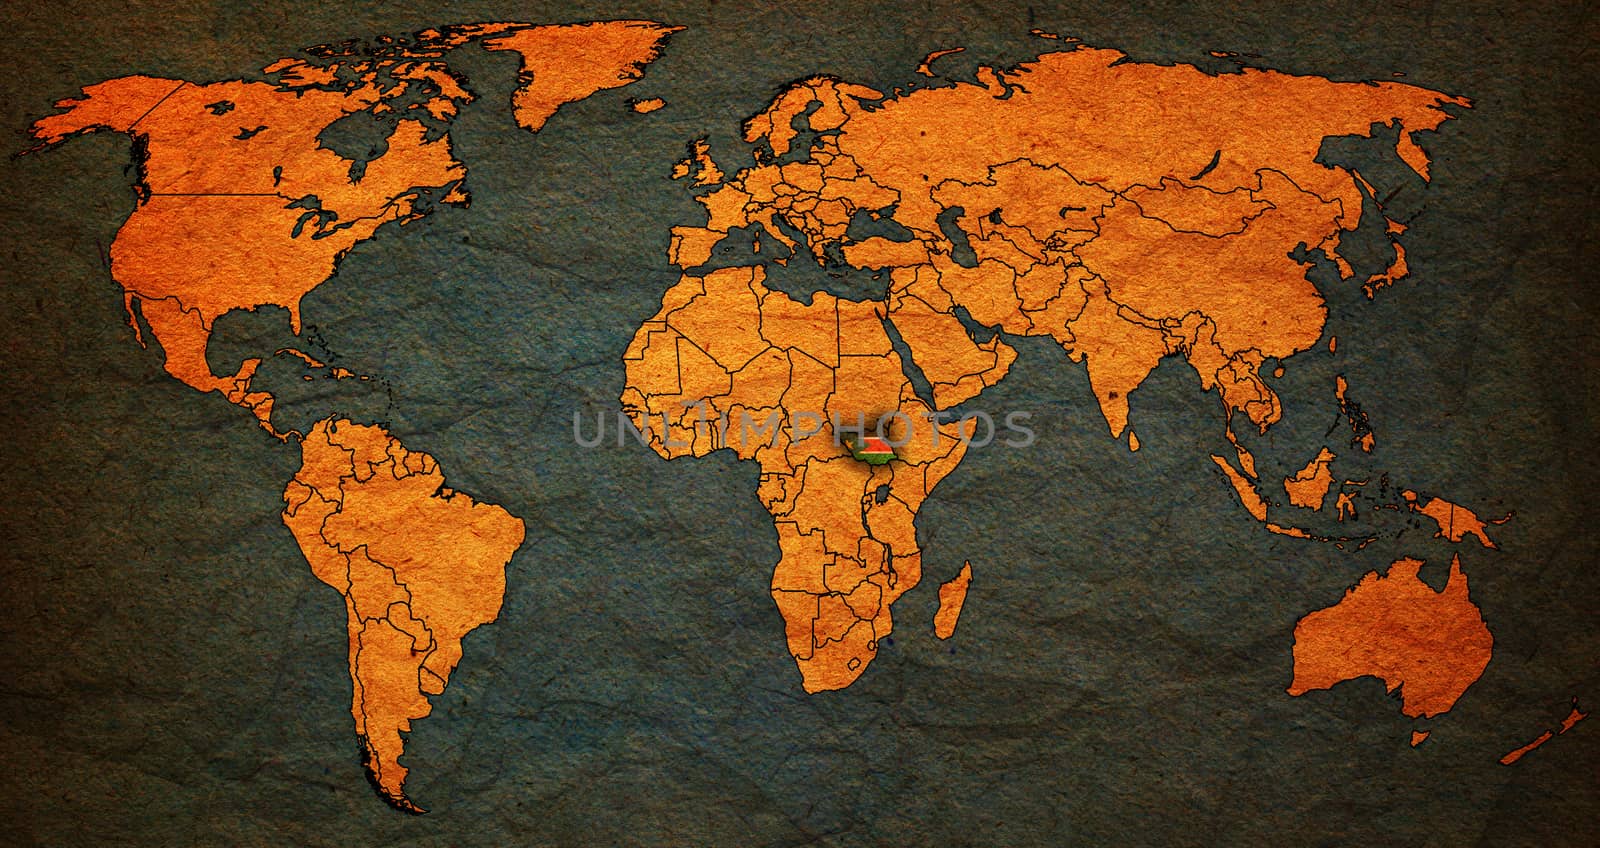 south sudan territory on world map by michal812